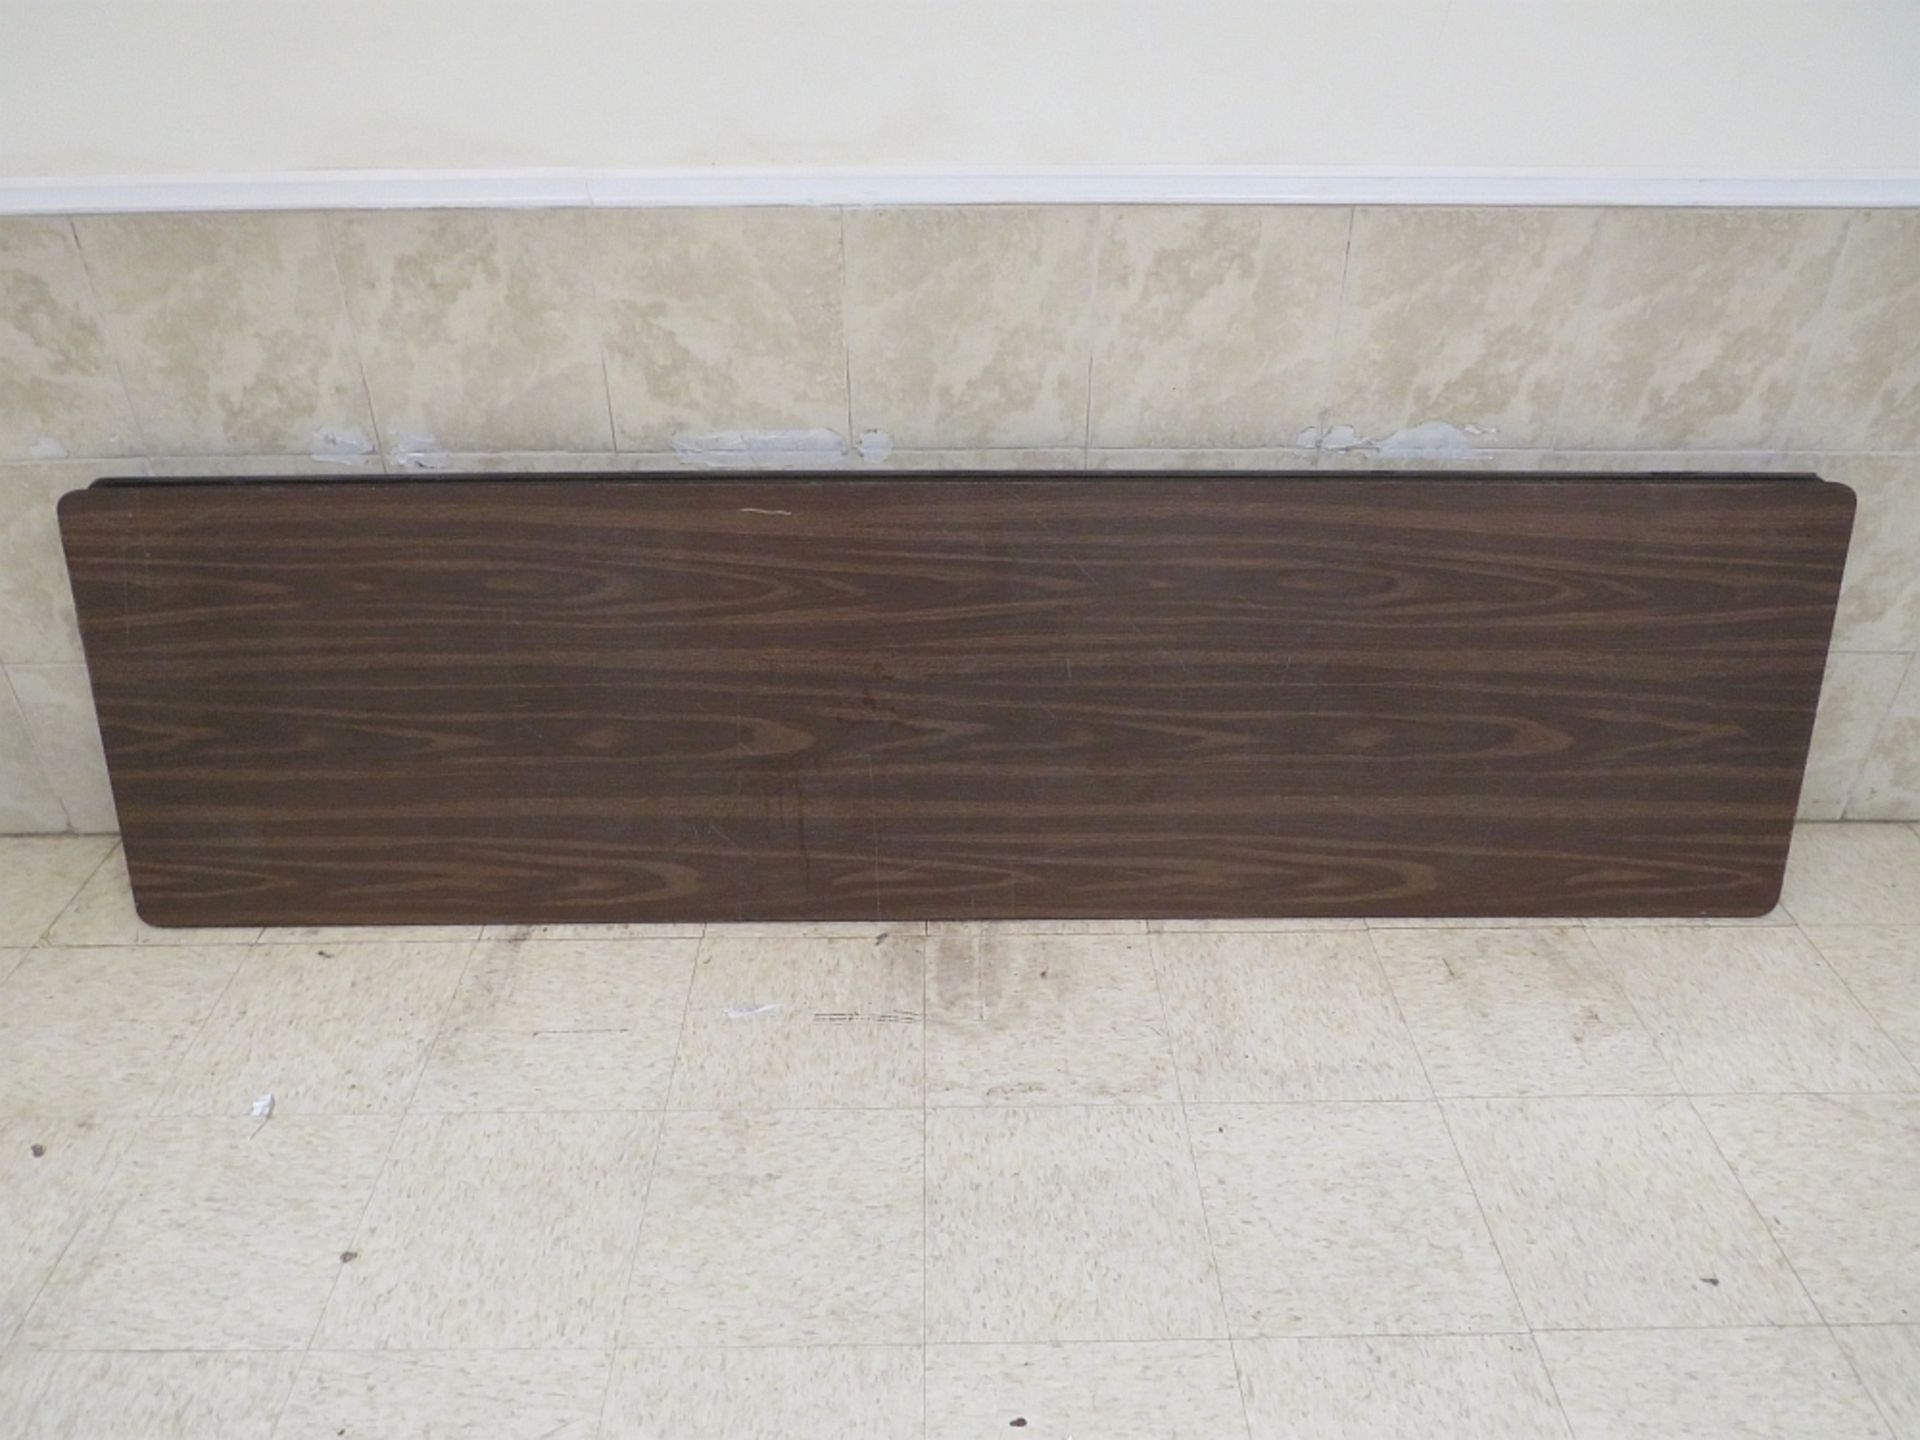 Table Rect - 89 in x 24 in - Wood Grain/Privacy Panel